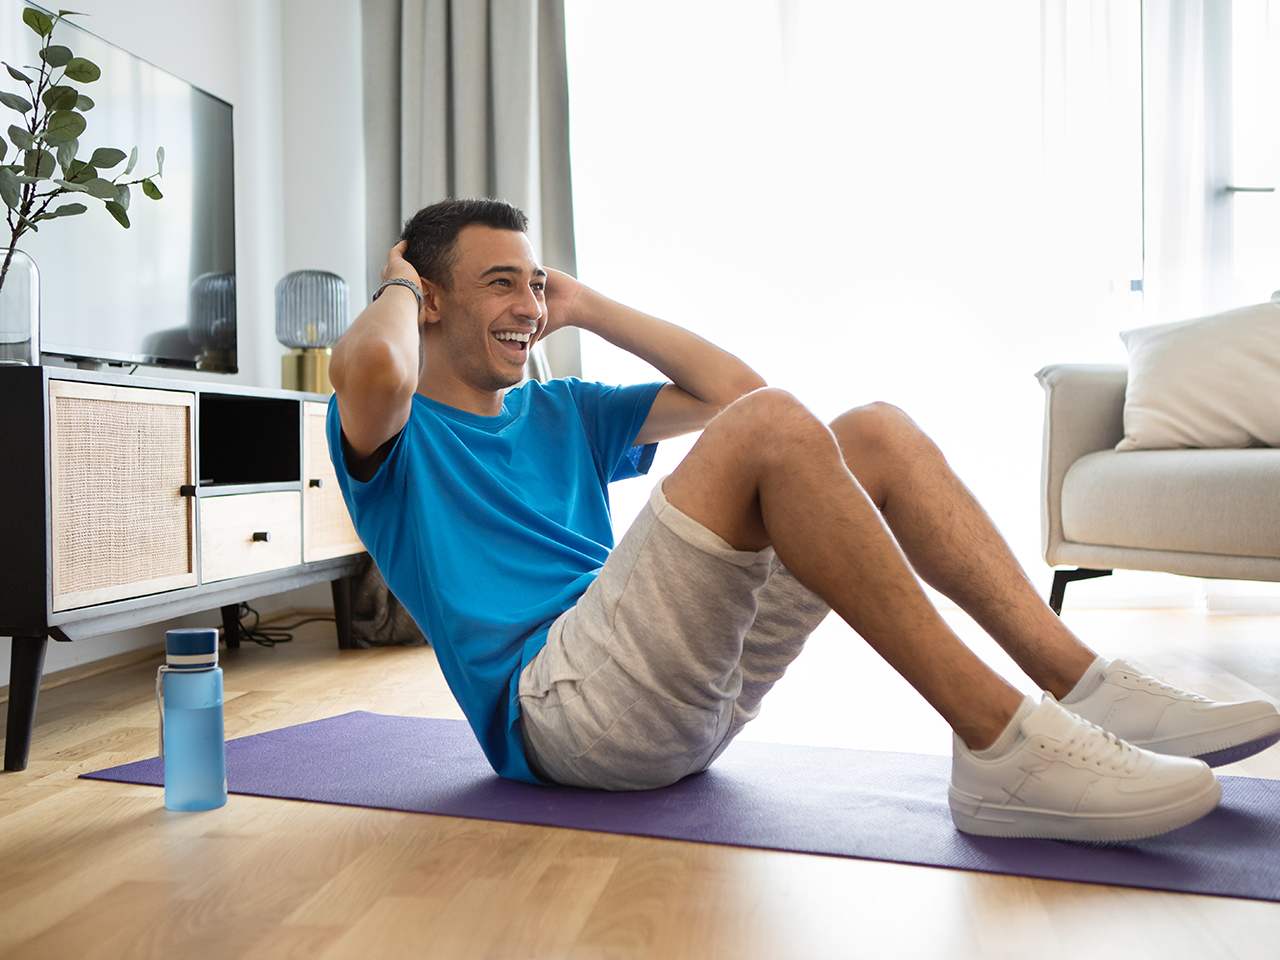 Home Workouts: How to Stay Fit and Motivated Without Gym